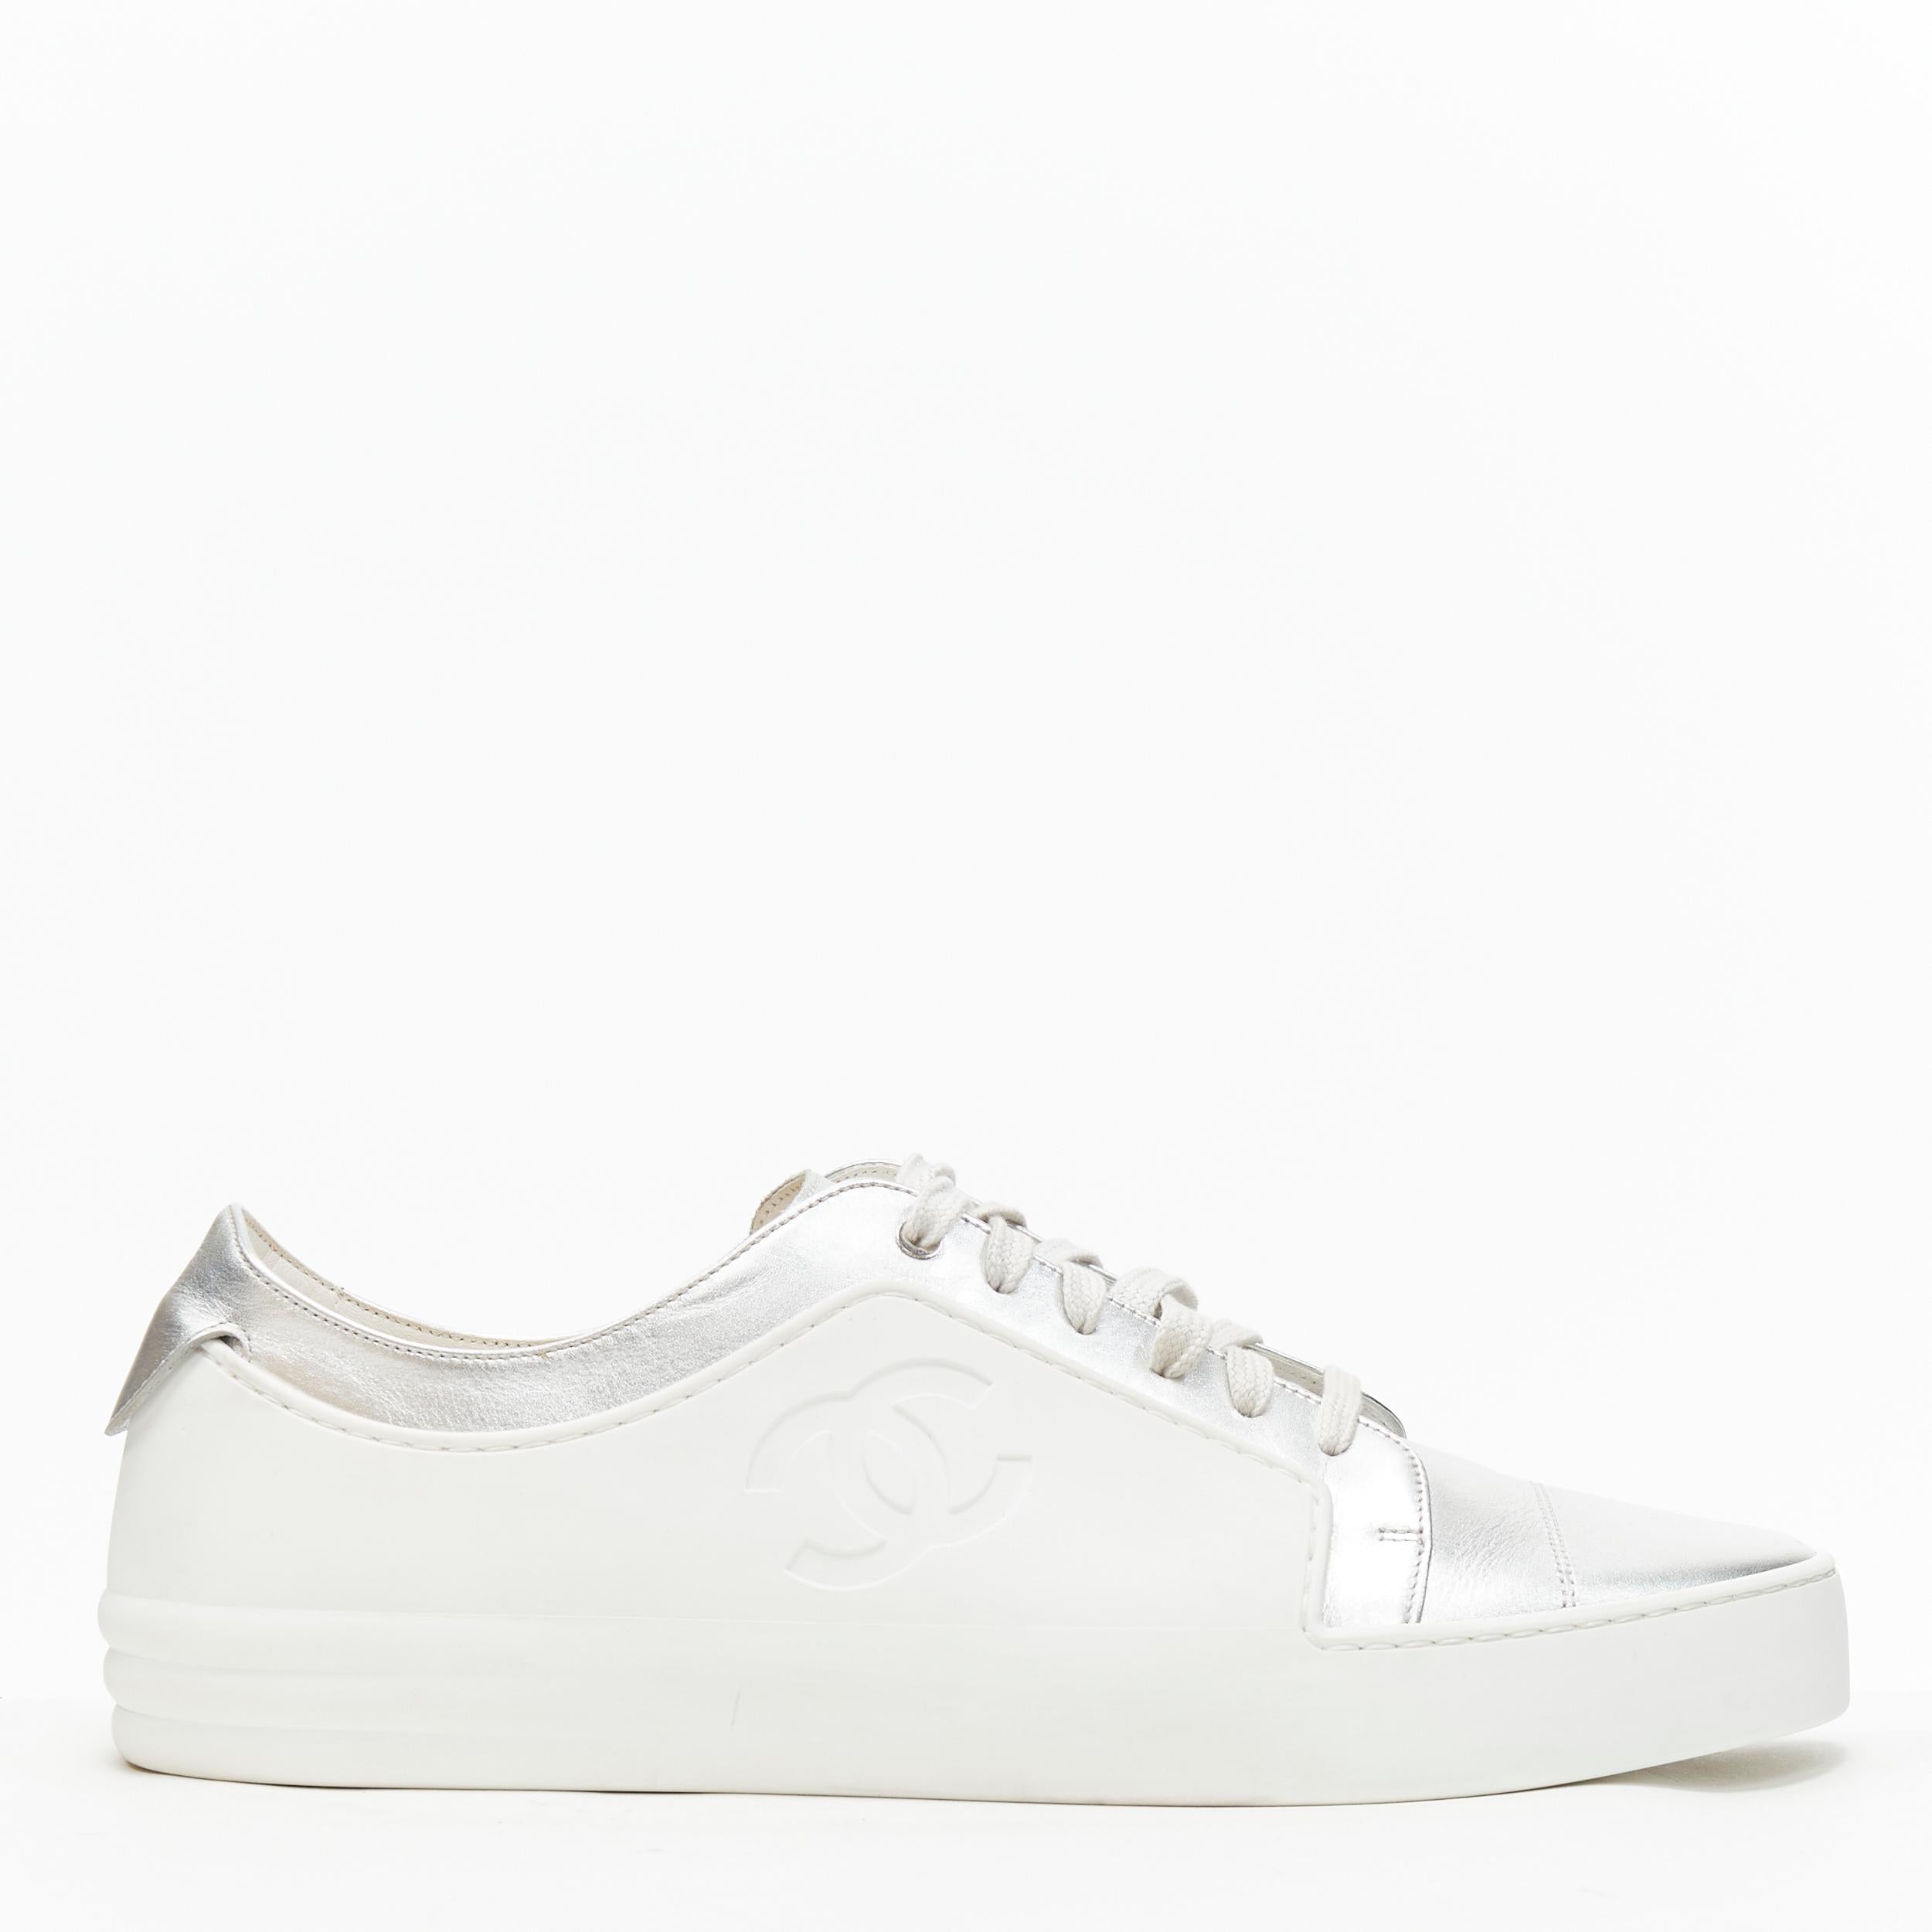 rare CHANEL interlocking CC white rubber metallic silver low top sneaker EU43 Reference: TGAS/B01067 
Brand: Chanel 
Model: CC rubber silver leather sneaker 
Material: Rubber 
Color: White 
Pattern: Solid 
Closure: Lace Up 
Extra Detail: White